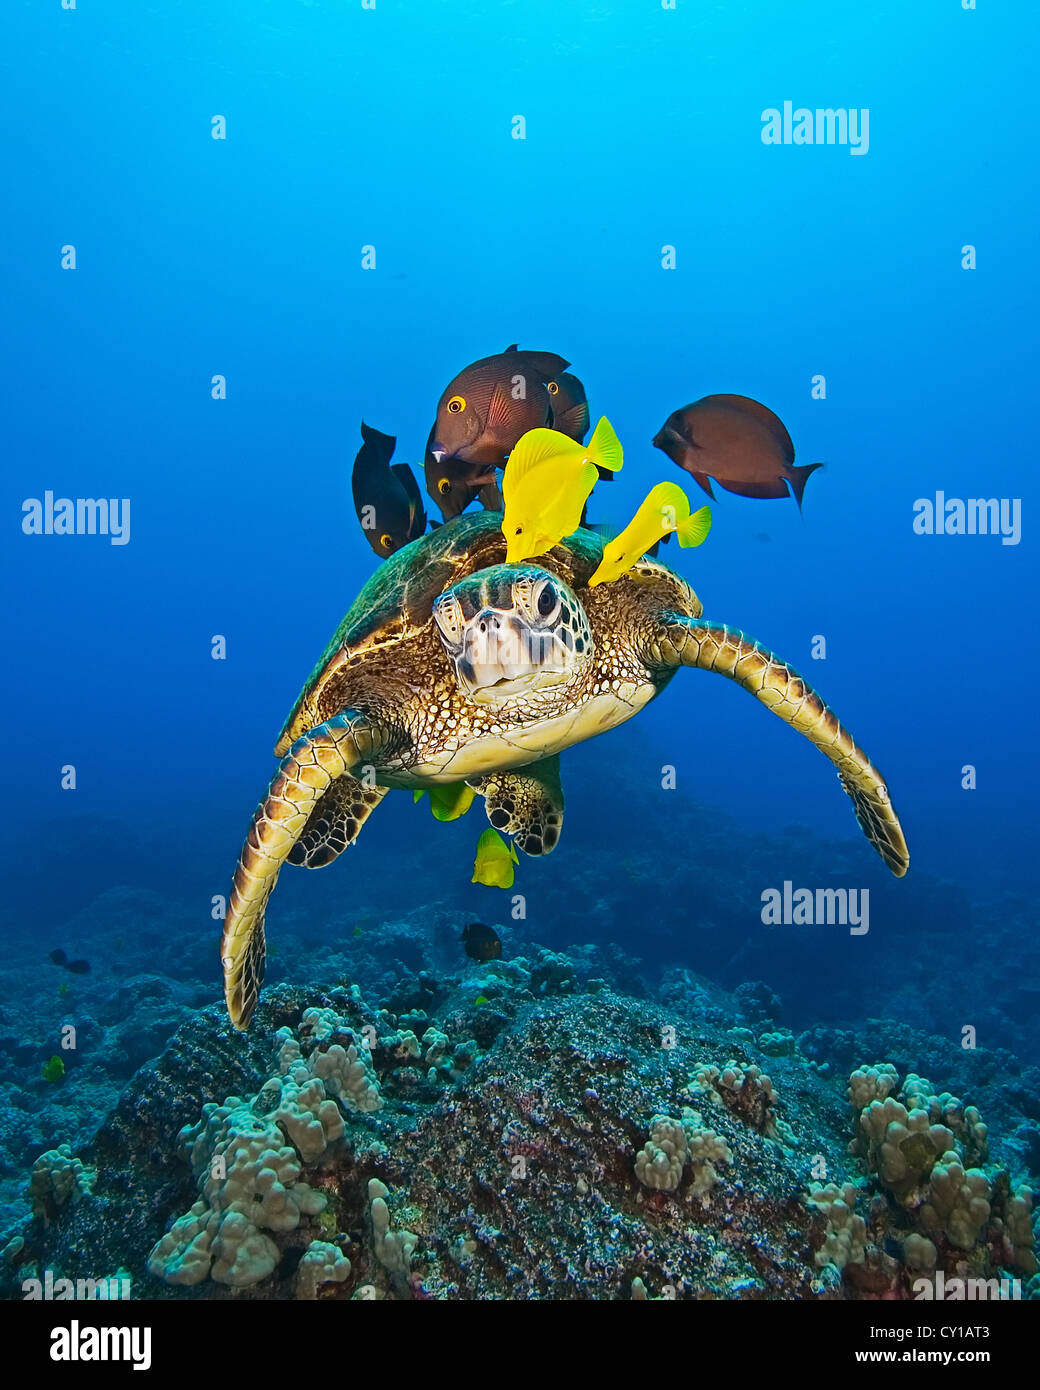 https://c8.alamy.com/comp/CY1AT3/green-sea-turtle-cleaned-by-fishes-chelonia-mydas-big-island-hawaii-CY1AT3.jpg